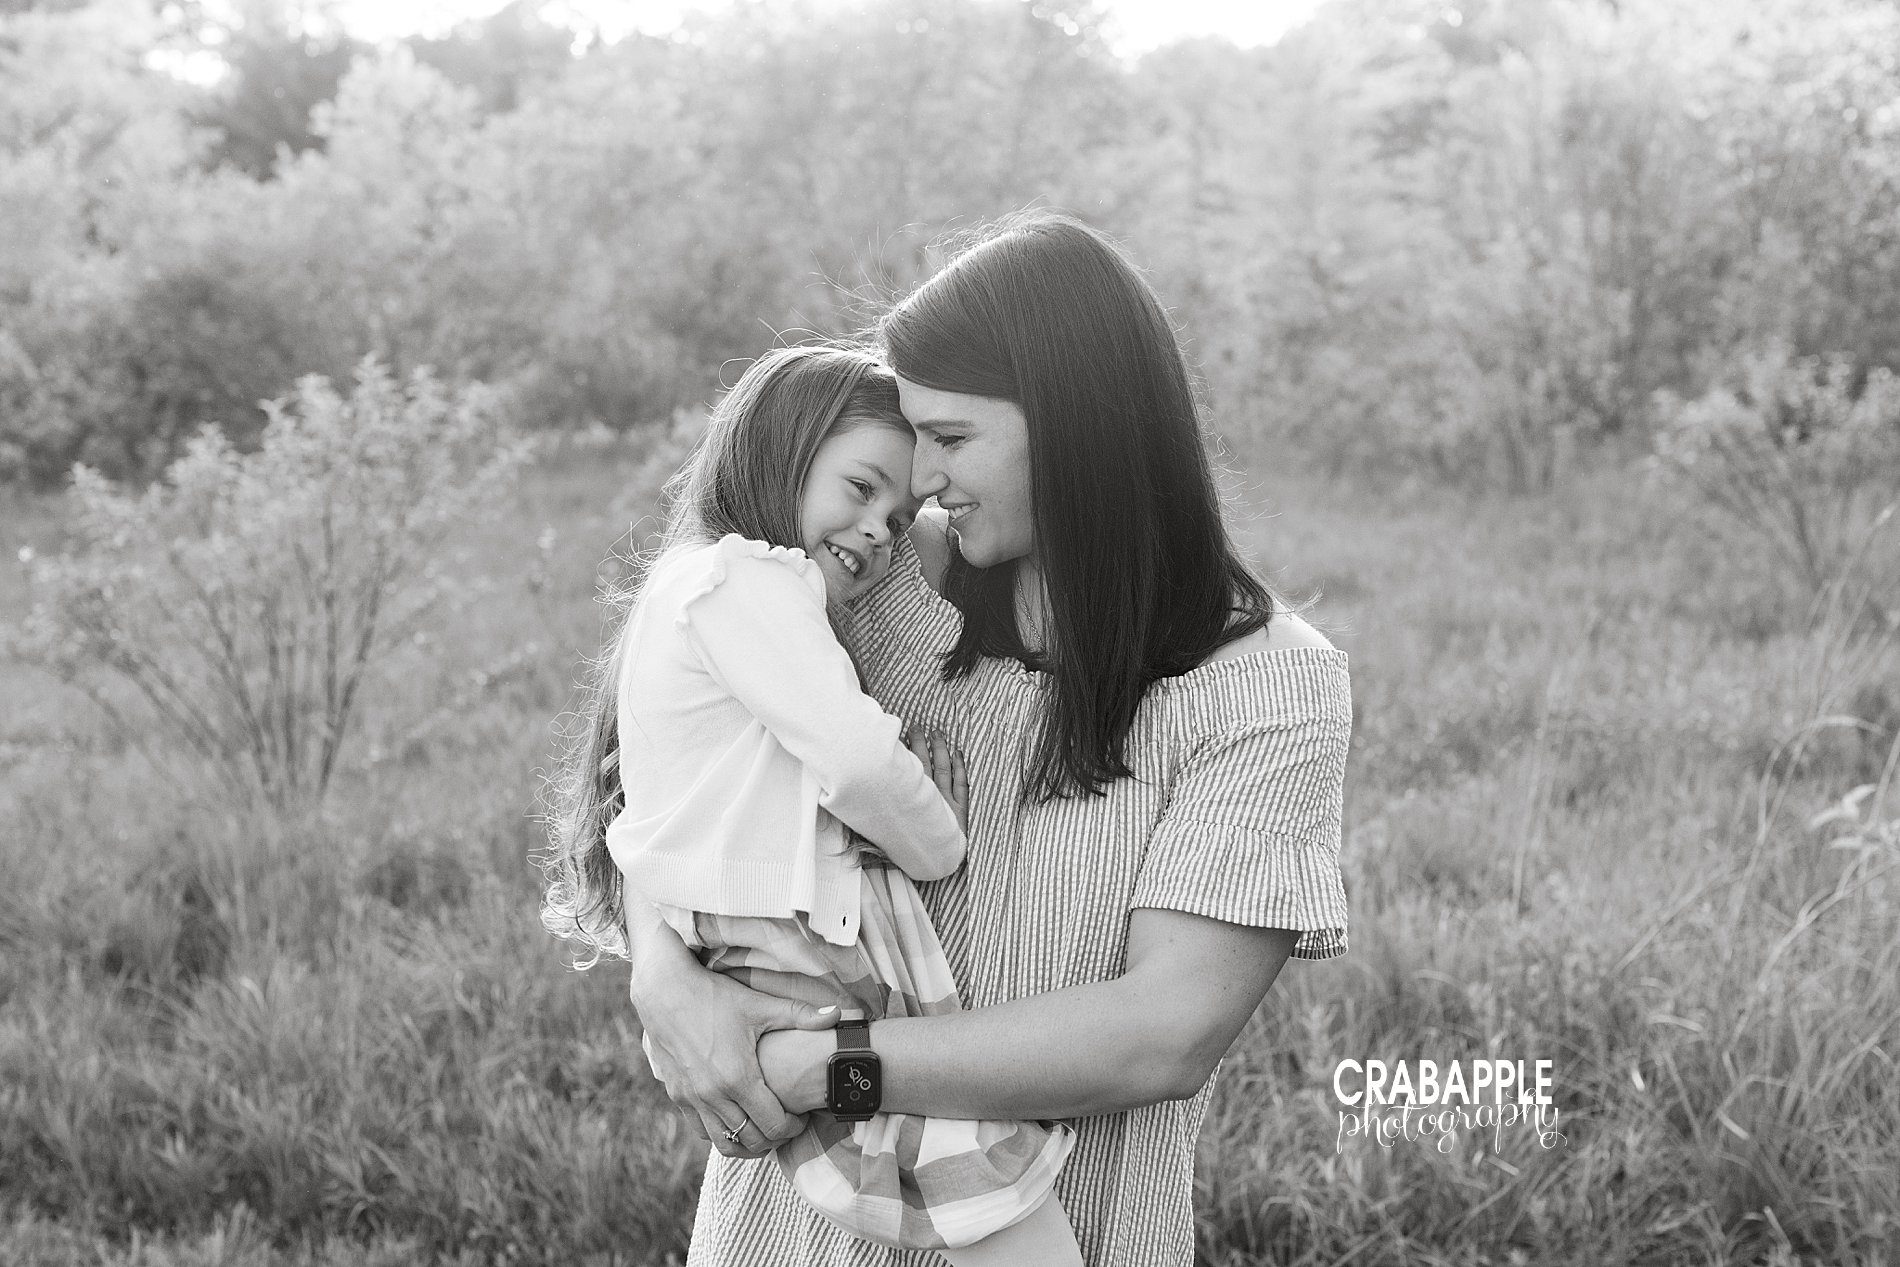 Mother daughter photo ideas outside